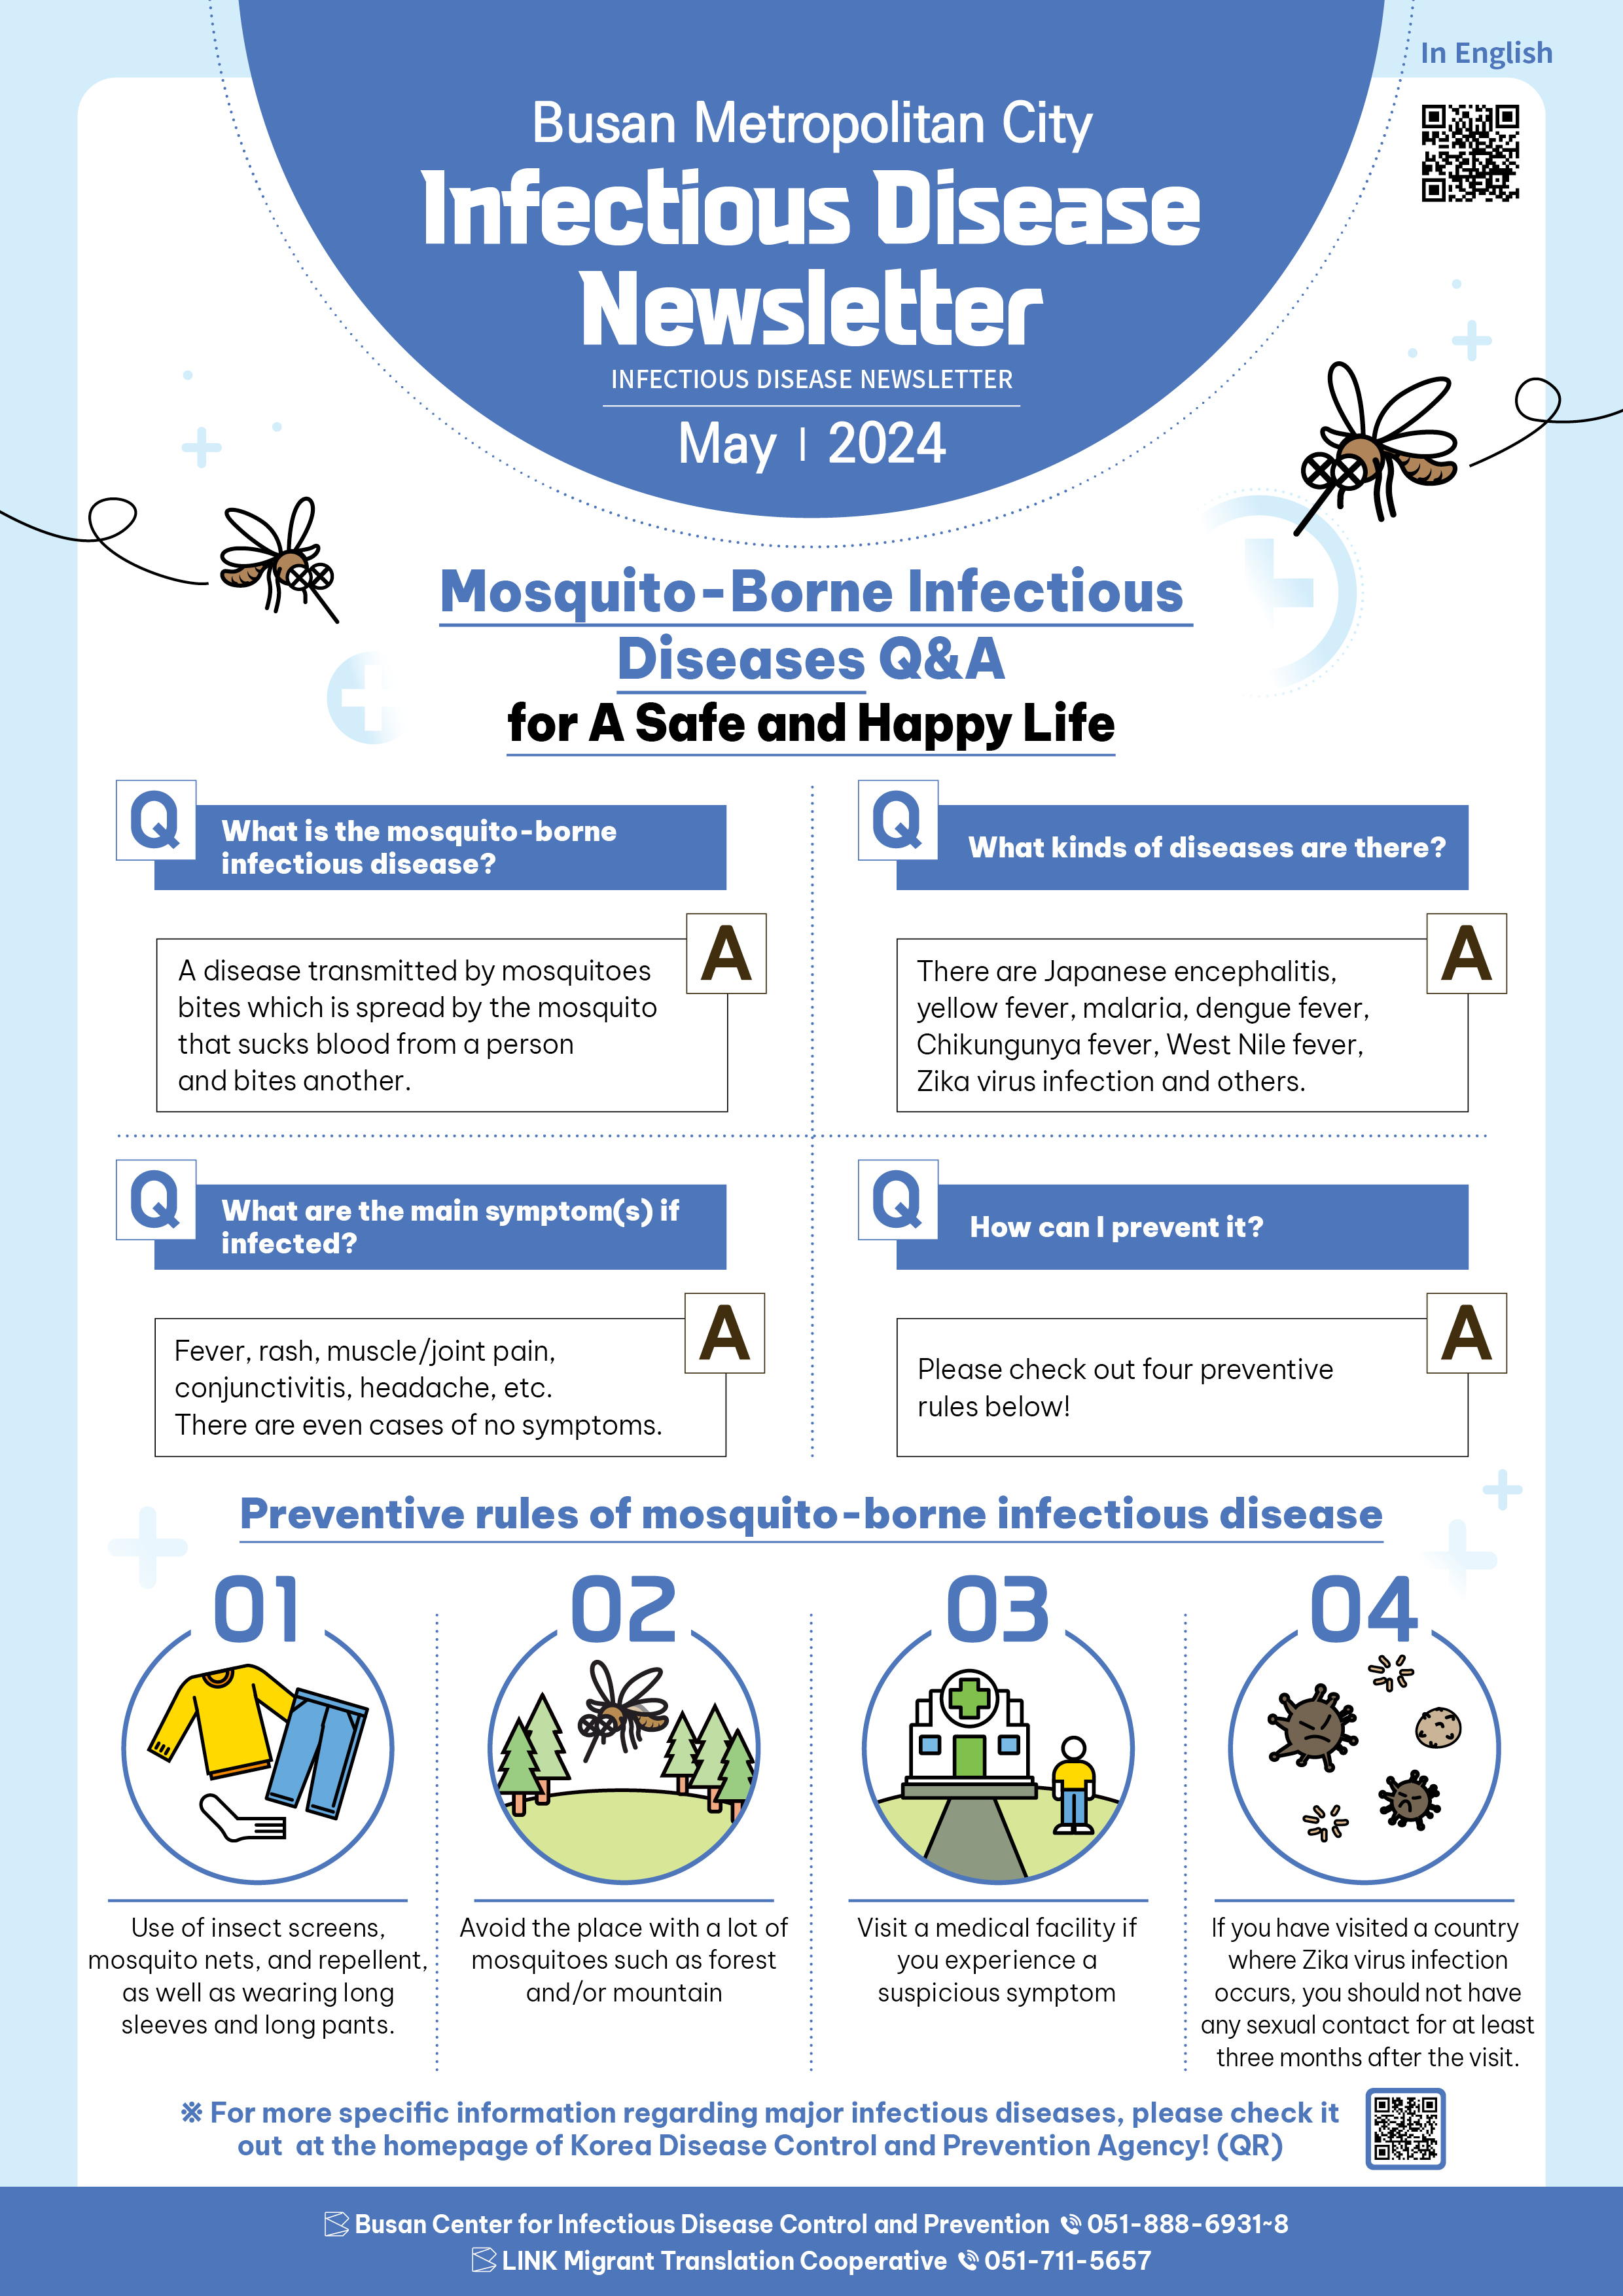  Infectious Disease Newsletter (May. 2024) in English